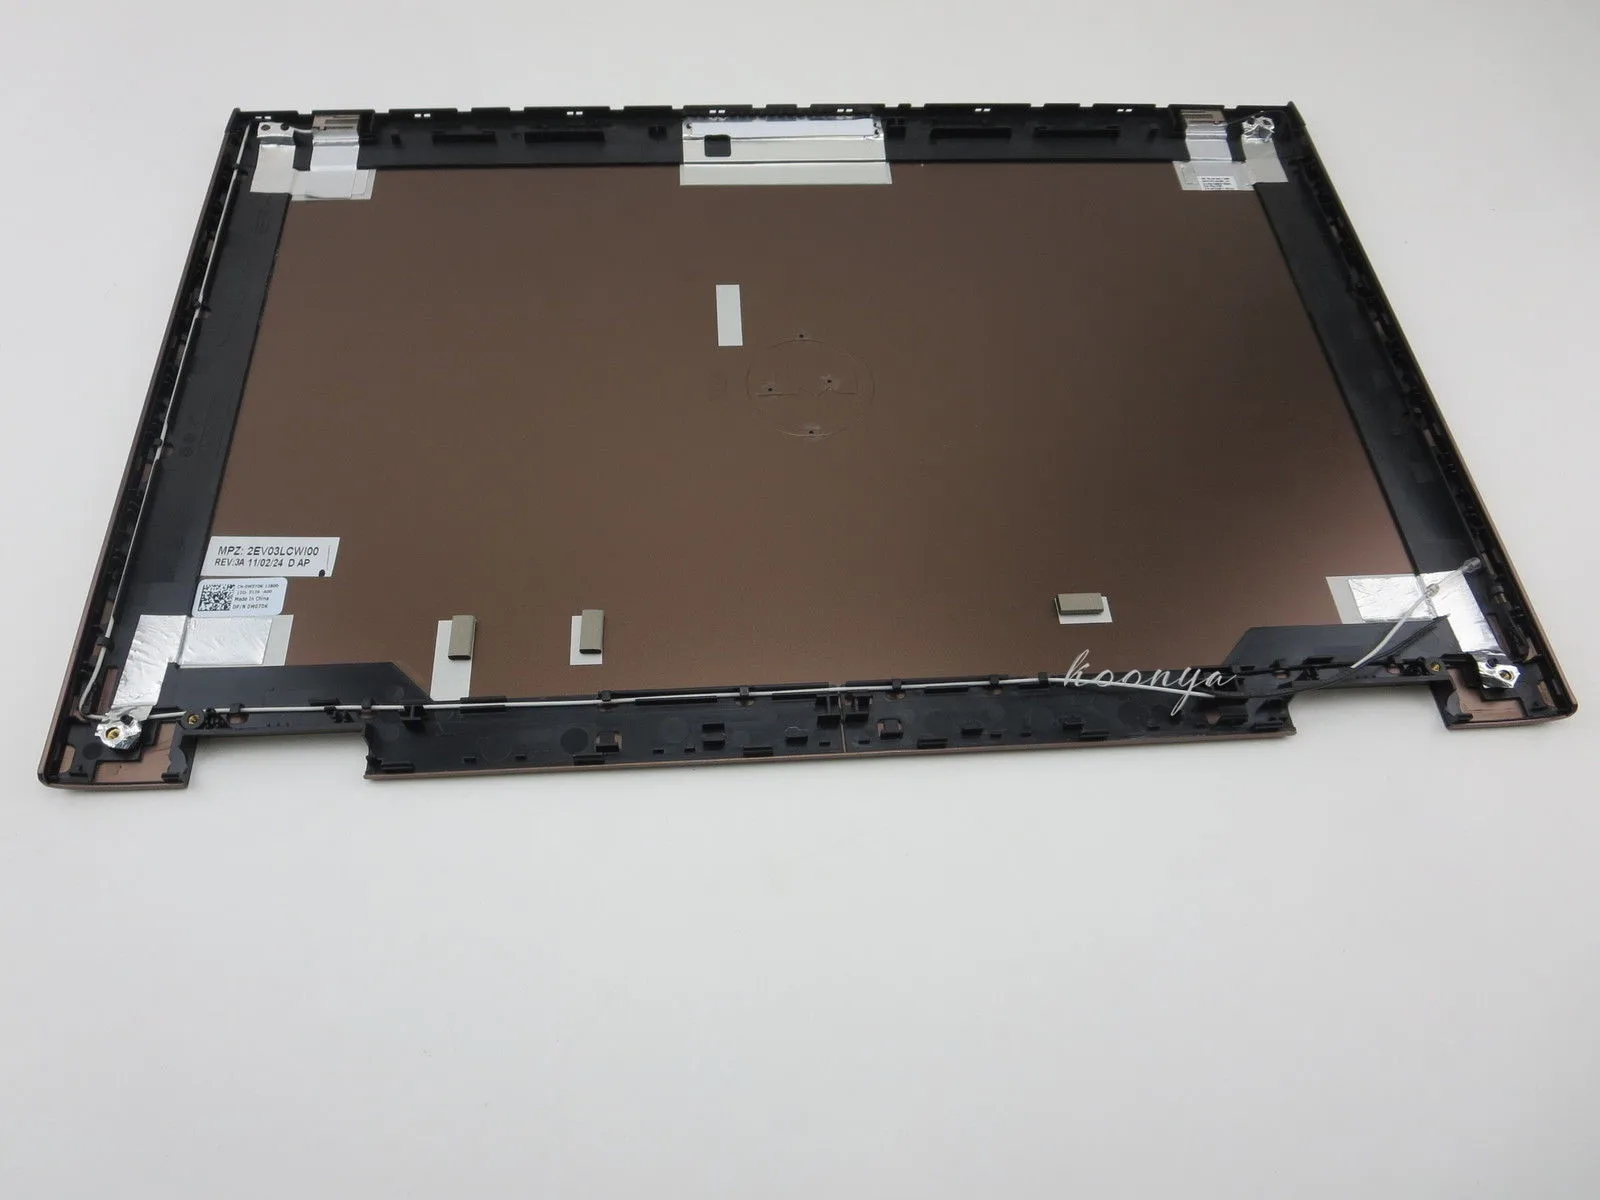 

New Genuine For Dell Vostro 3750 laptop LCD Screen Back Cover 0W07DK W07DK